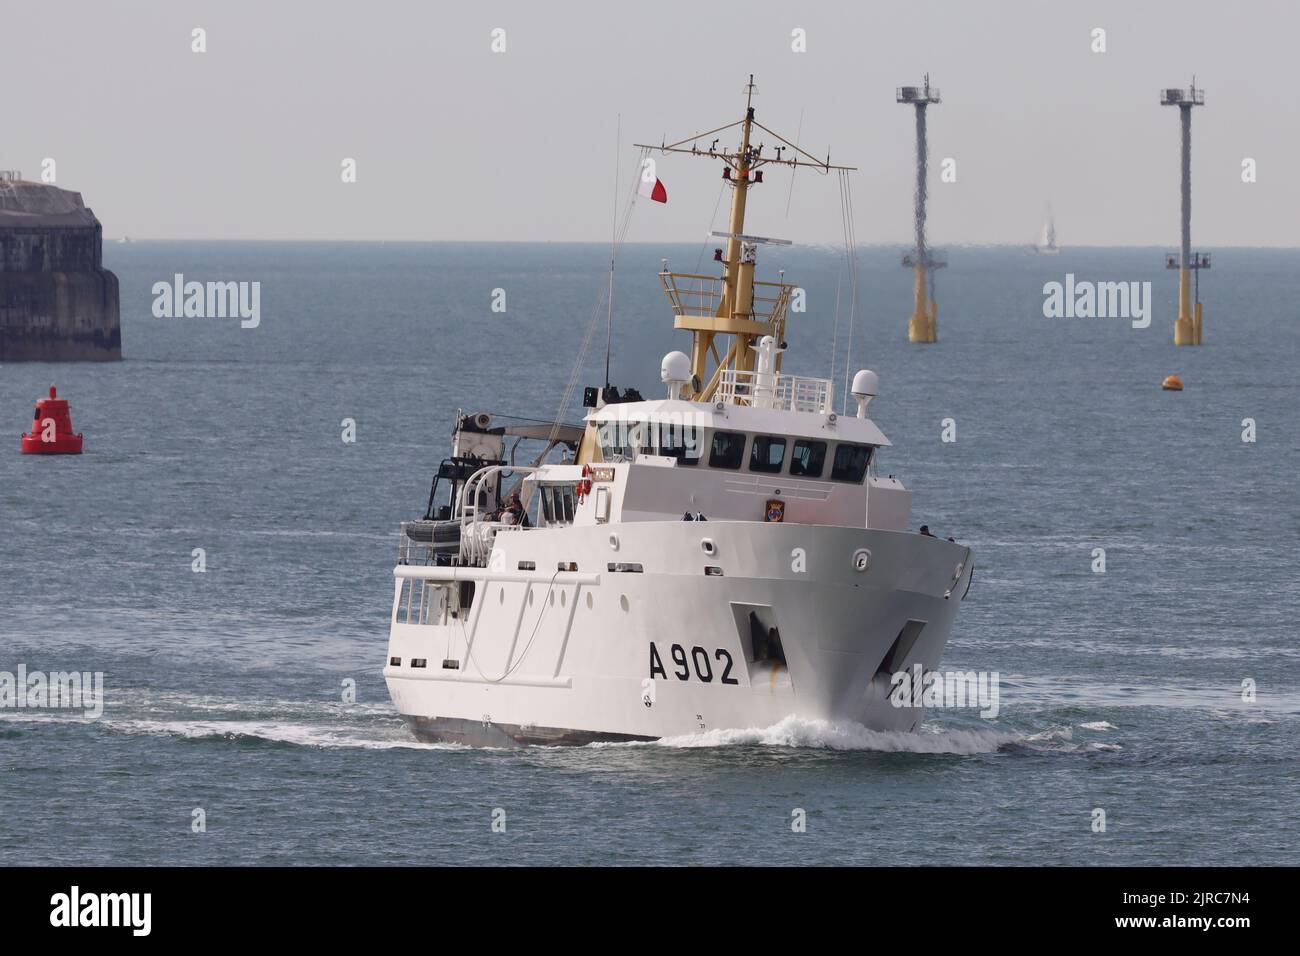 The Dutch naval training ship HNLMS VAN KINSBERGEN changes course as it approaches the Naval Base Stock Photo